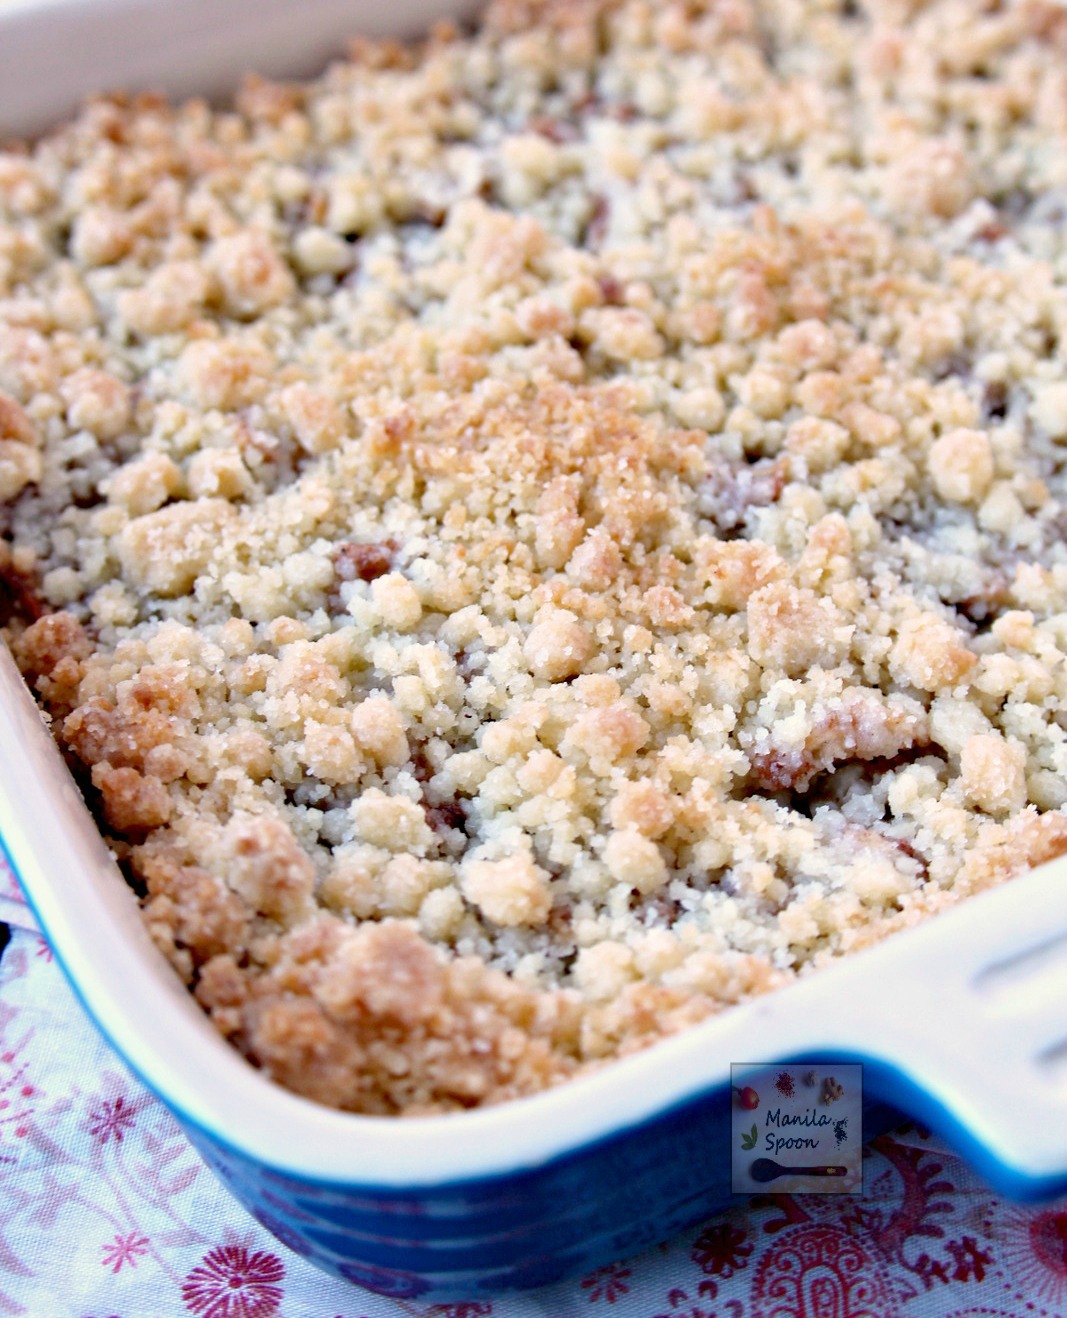 All the flavors of your favorite apple pie and the delicious Dutch-style crumb topping make these bar cookies exceptionally yummy! Easy to make as well - Dutch Apple Pie Bars!